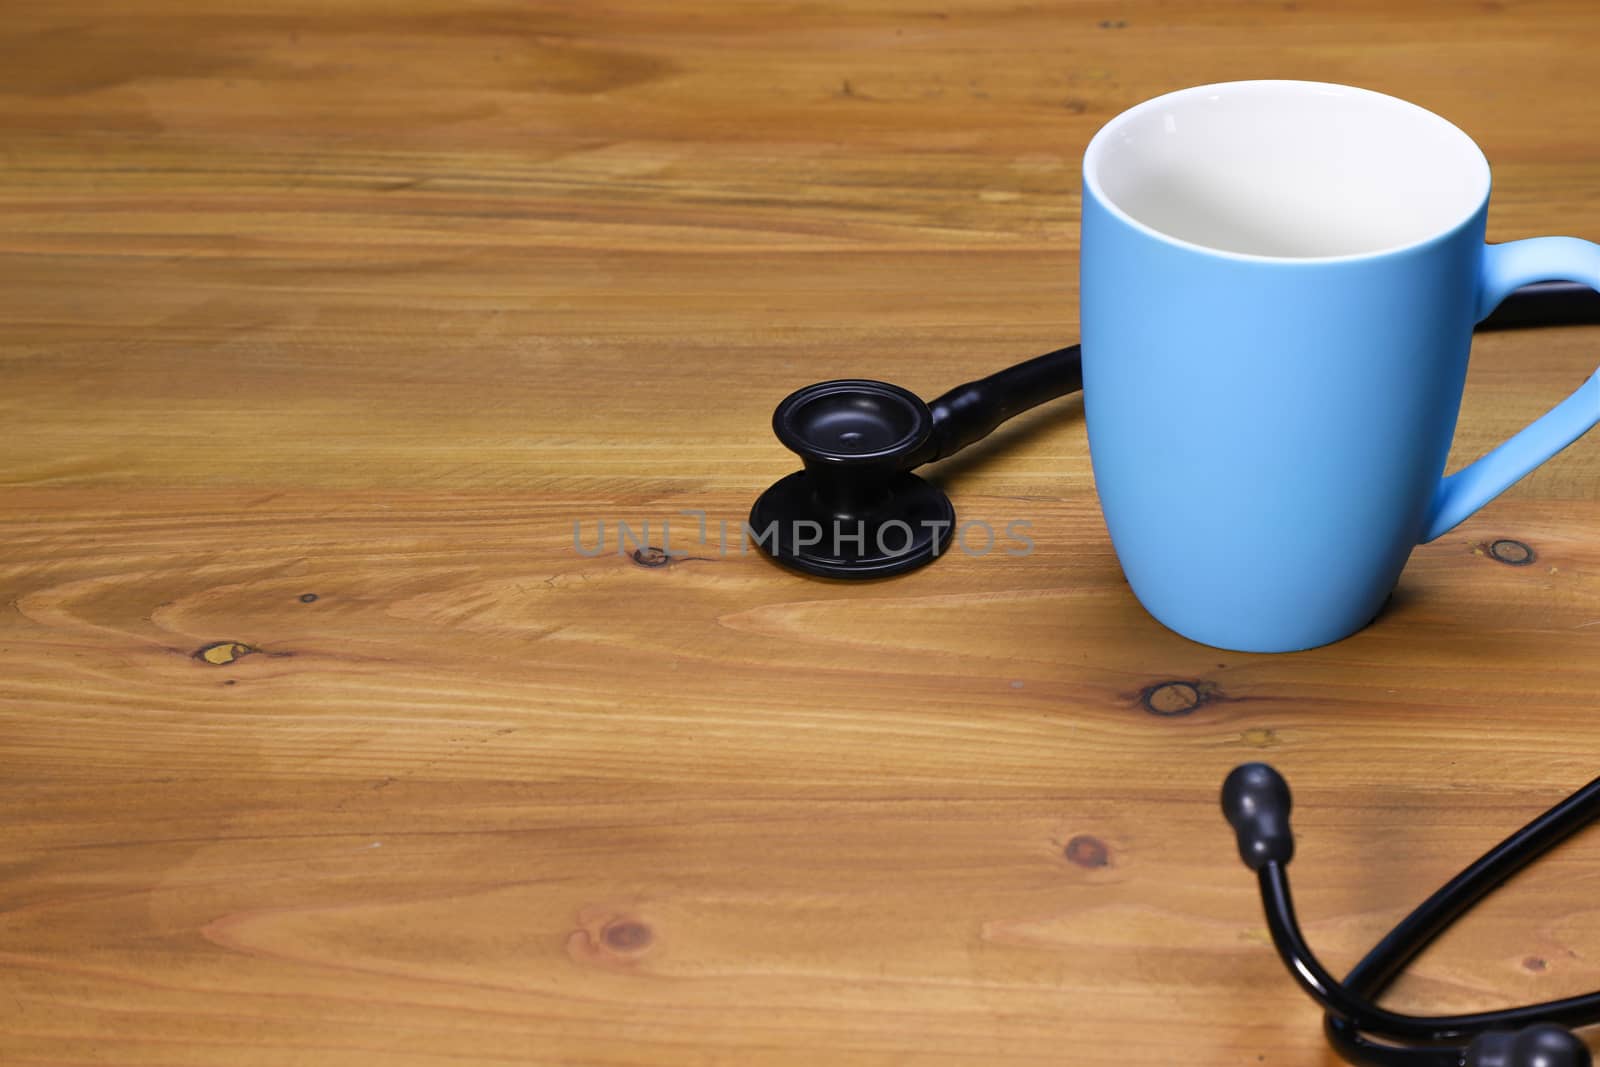 a black stethoscope and a blue ceramic coffee mug on a brown wooden table